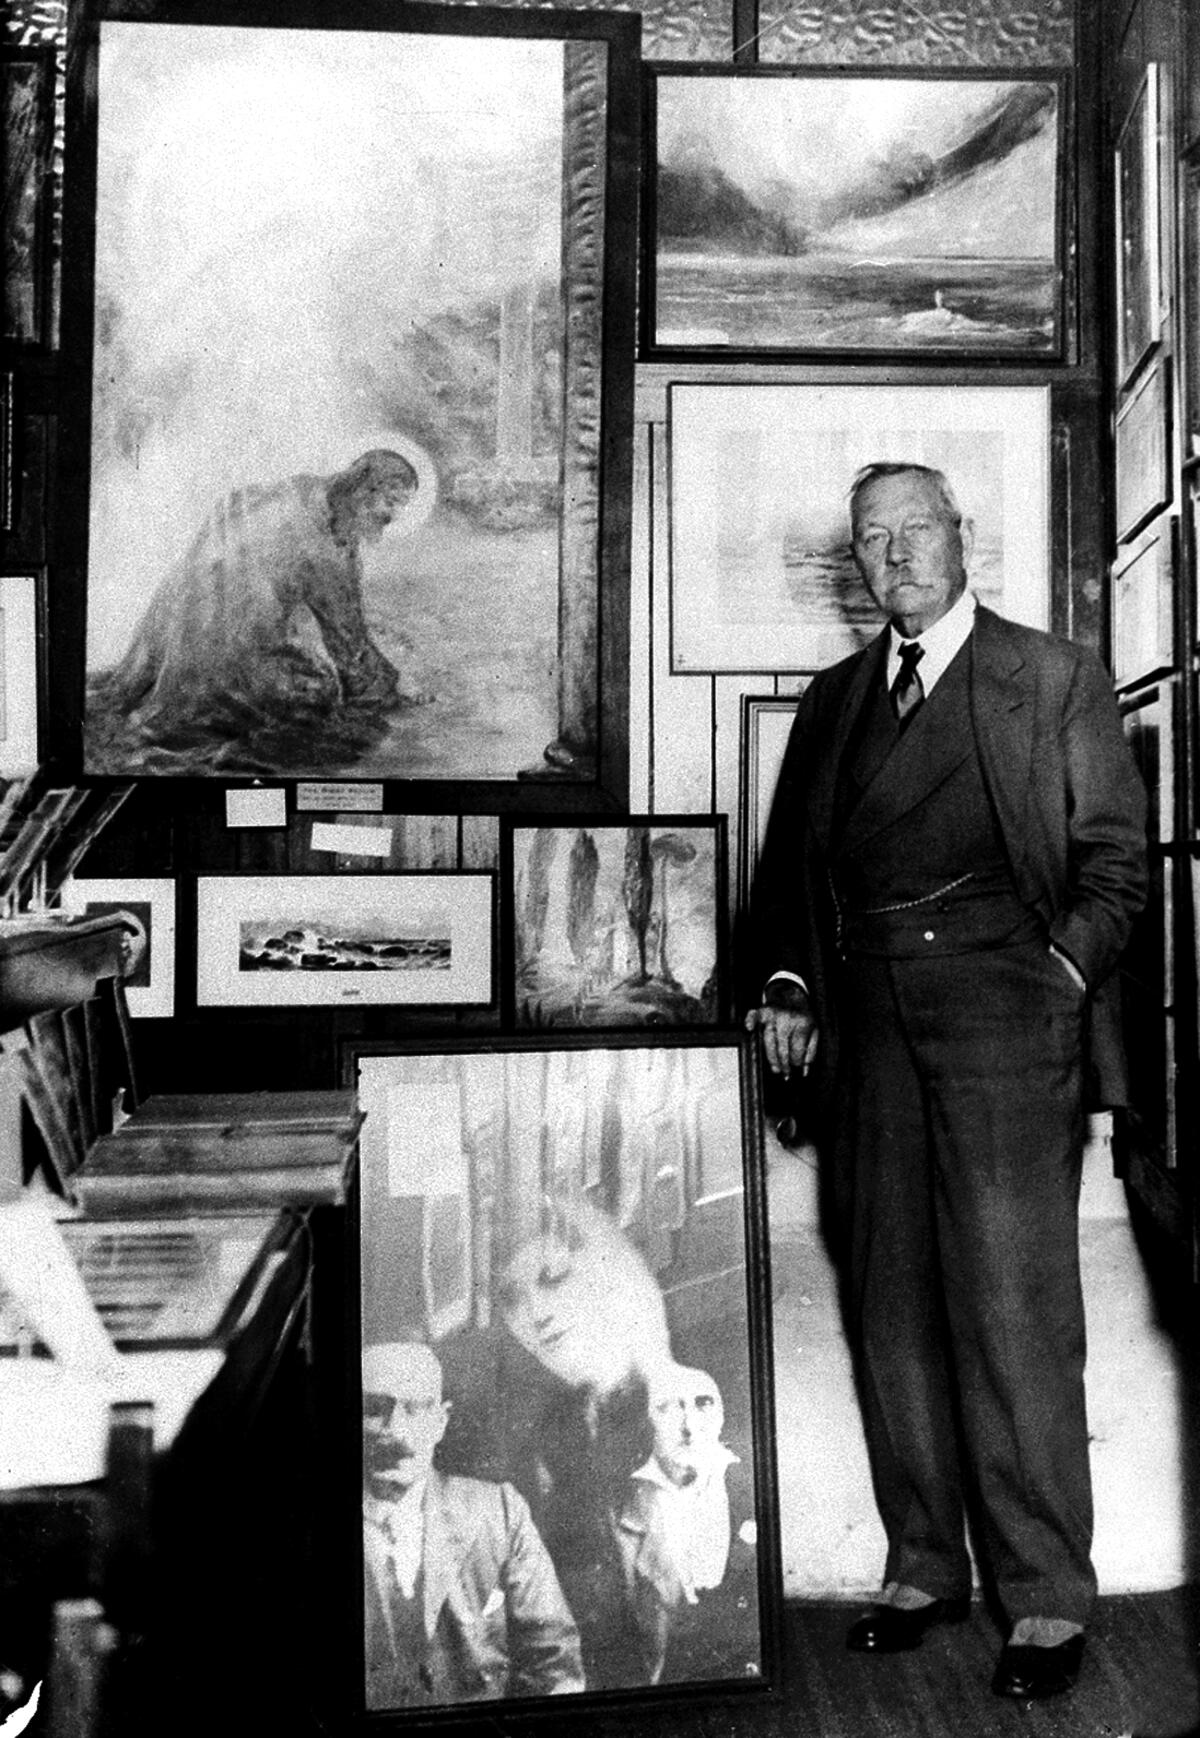 Arthur Conan Doyle, wearing a suit, stands beside a wall of paintings 